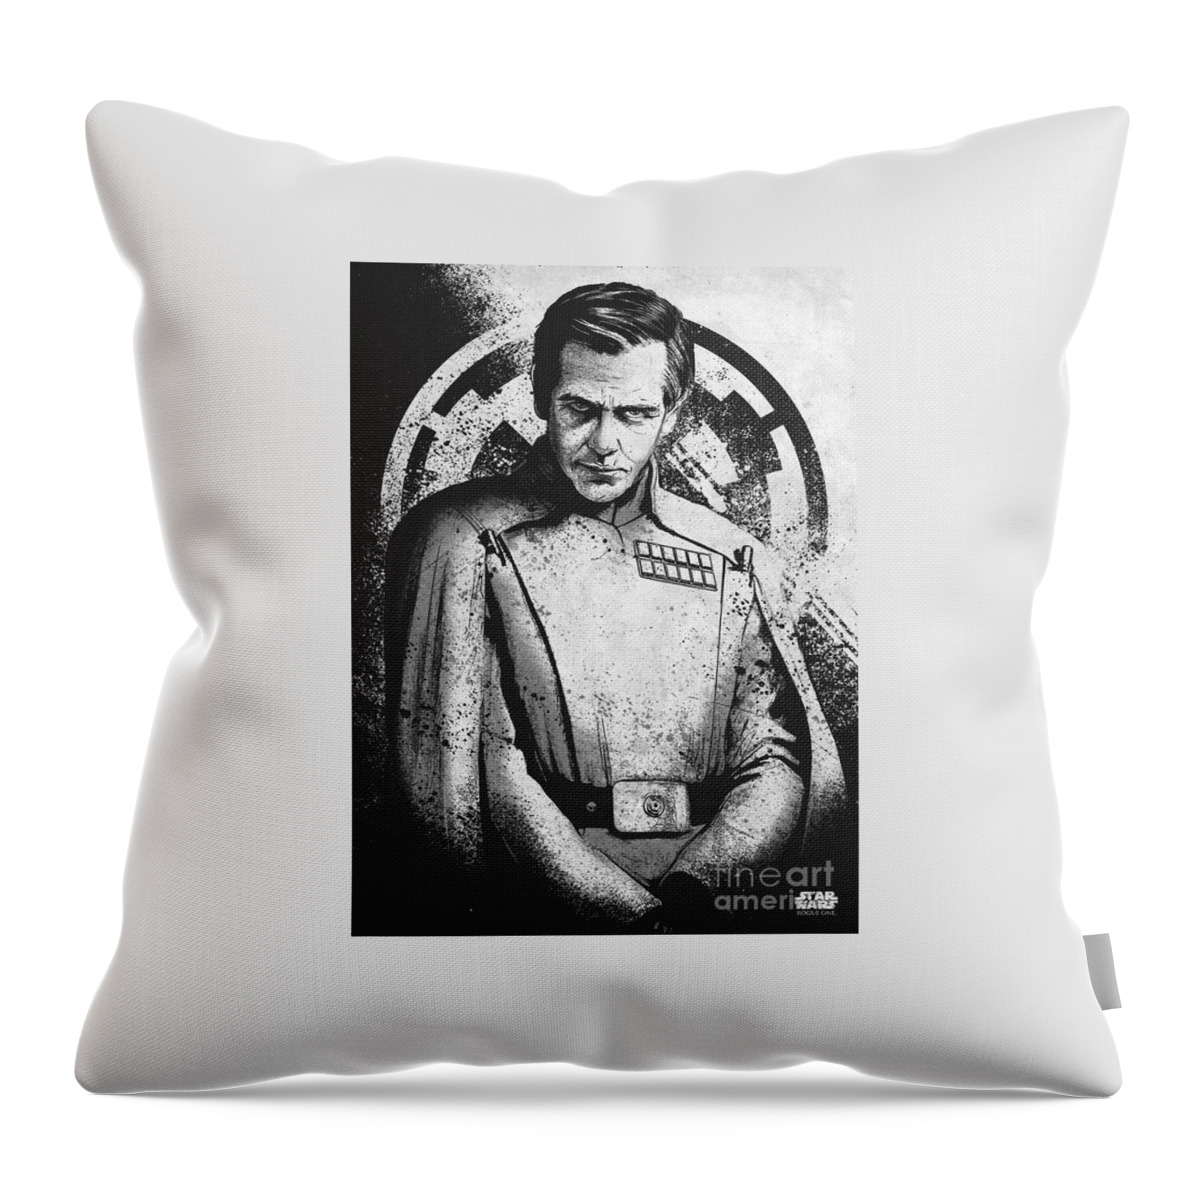 Star Wars #6 Throw Pillow by Timothy Oxley - Pixels